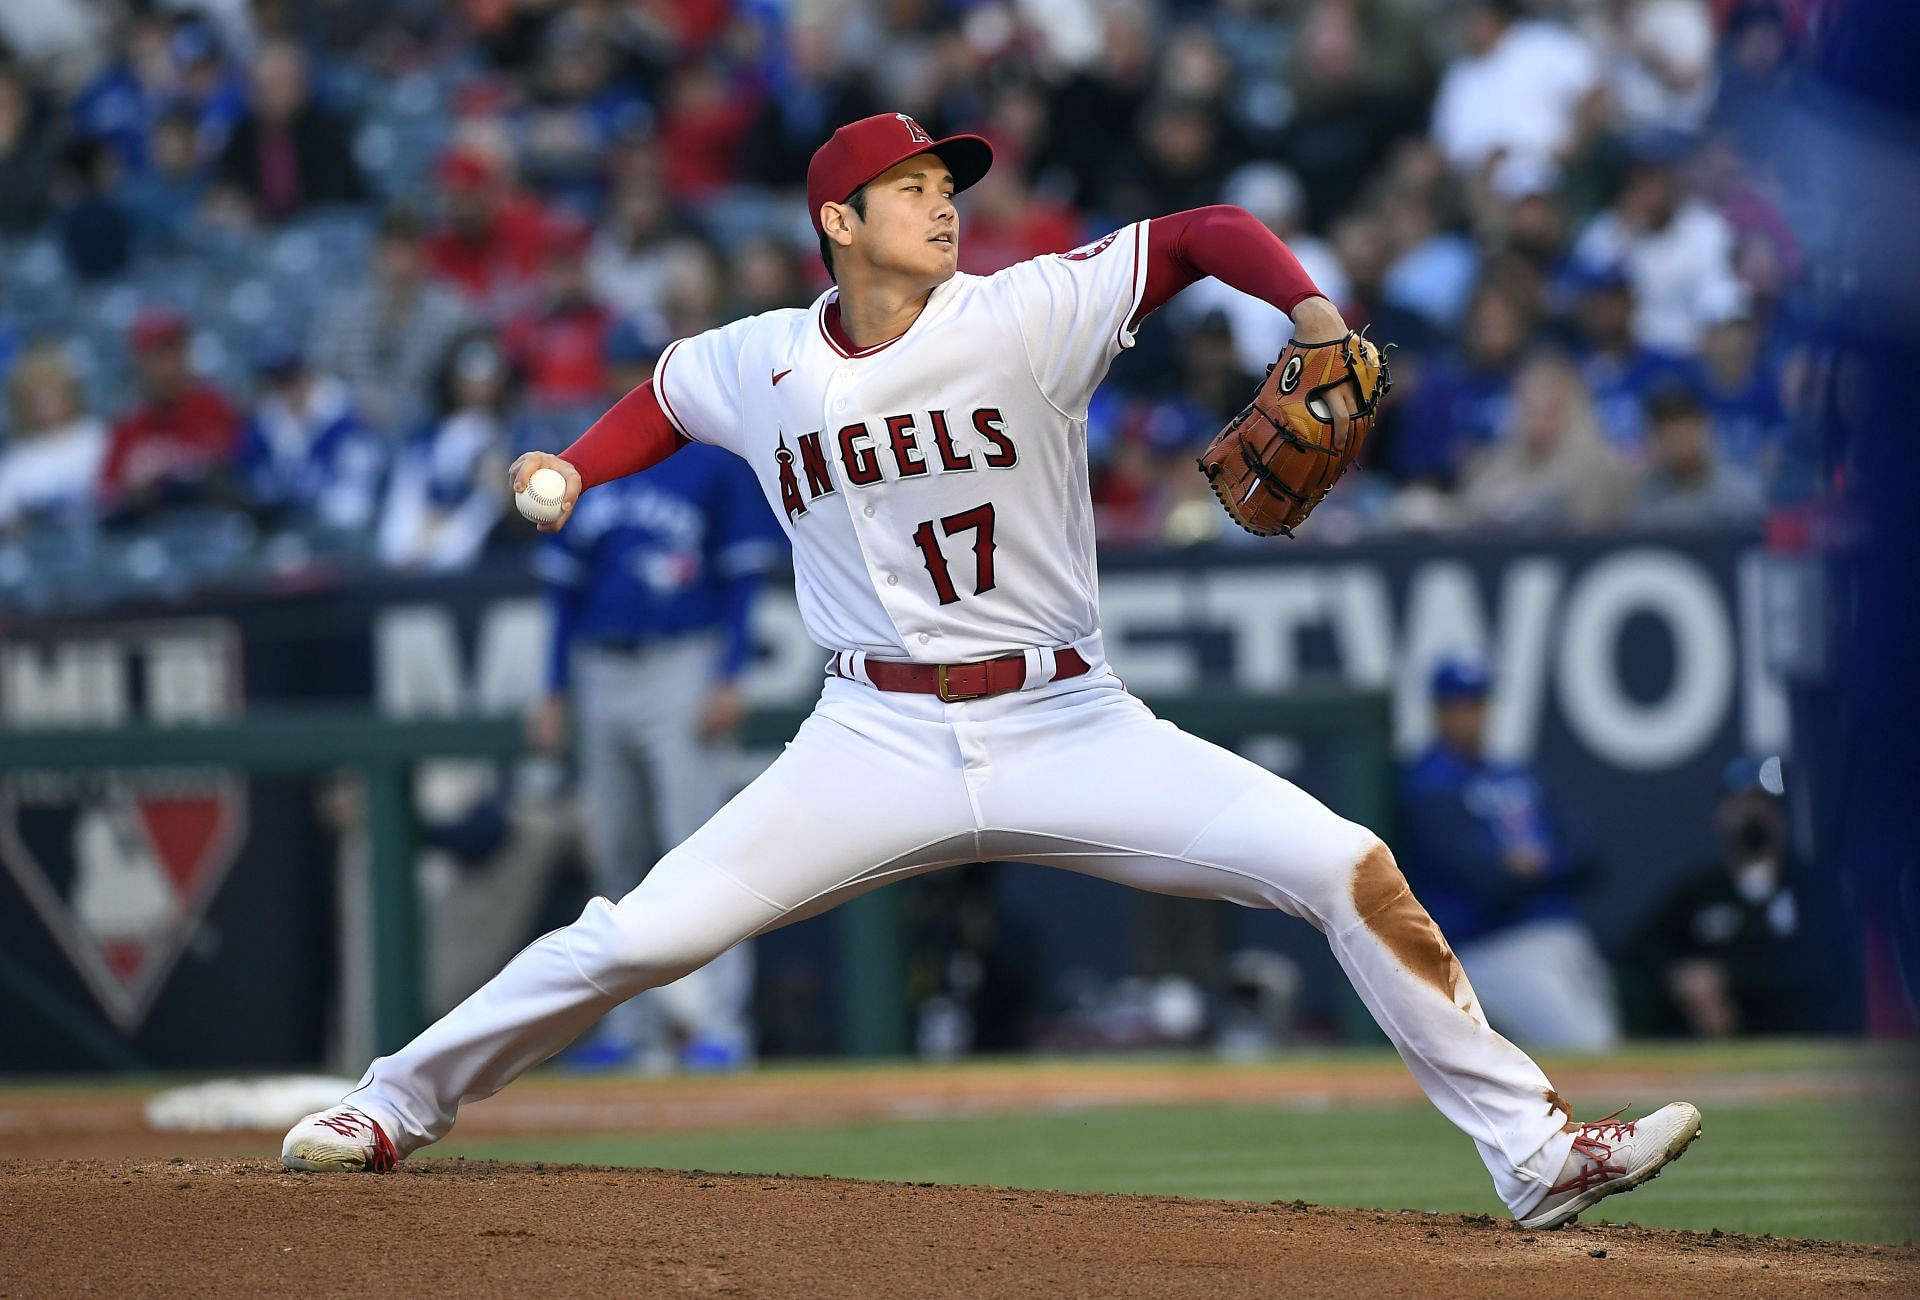 Los Angeles Angels starting pitcher Shohei Ohtani allowed eight hits and four runs over just three innings in his last start against the New York Yankees.